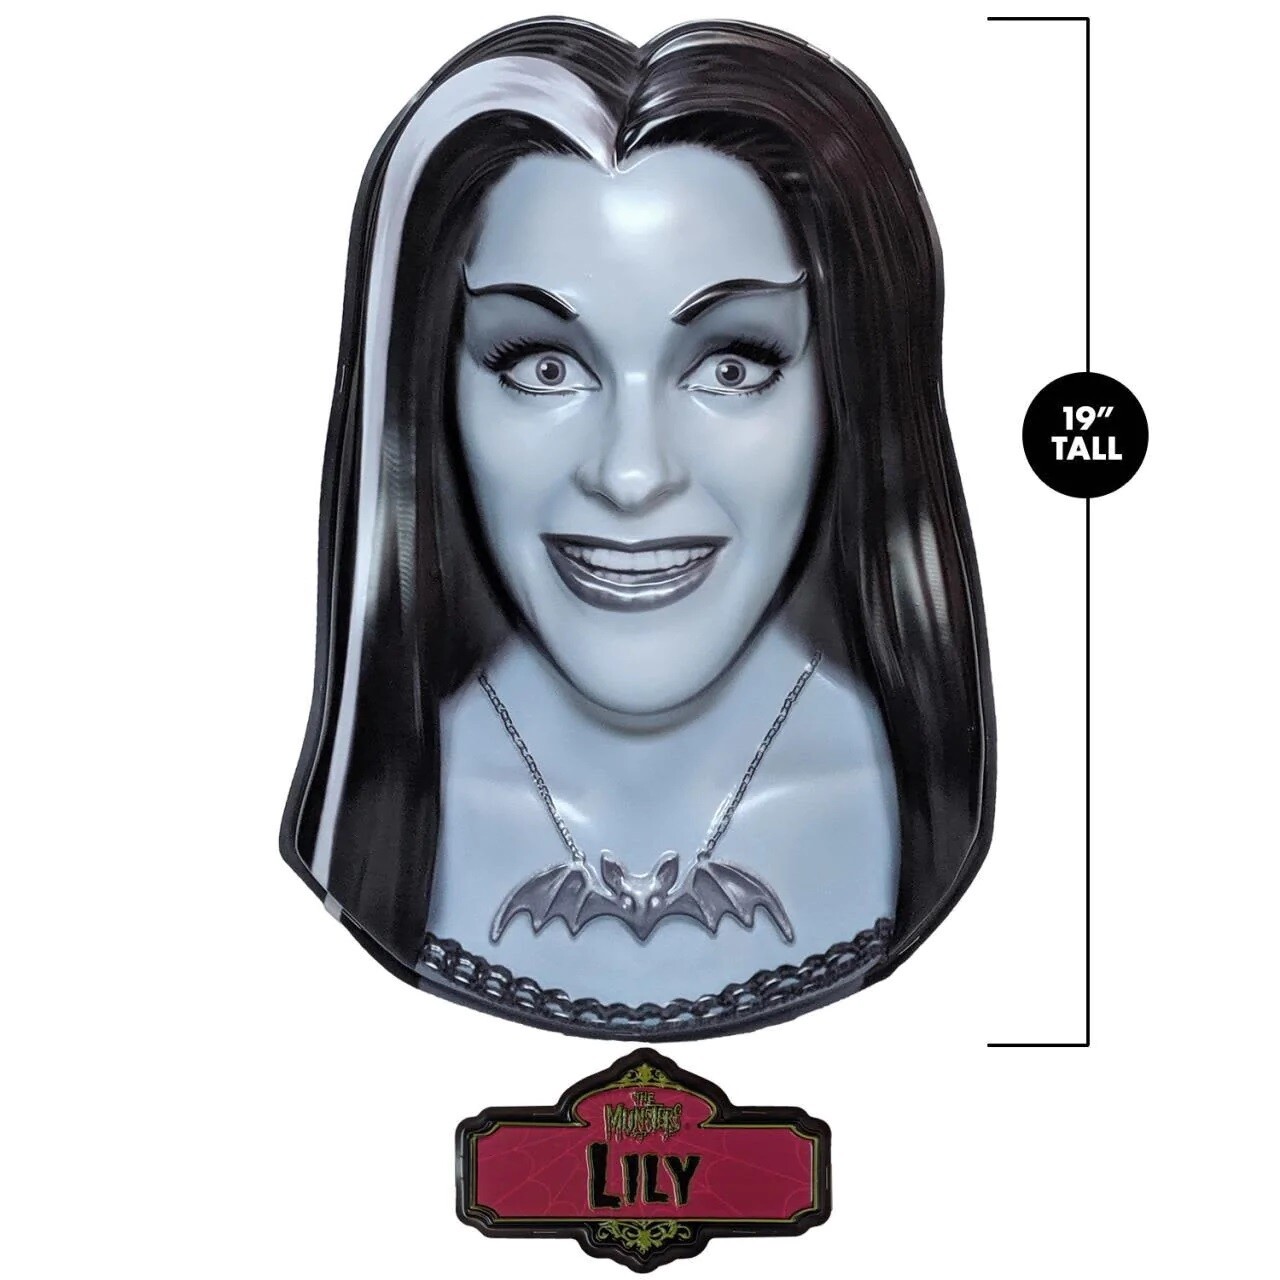 Lily Munster 19"H Plastic 3-D Wall Art